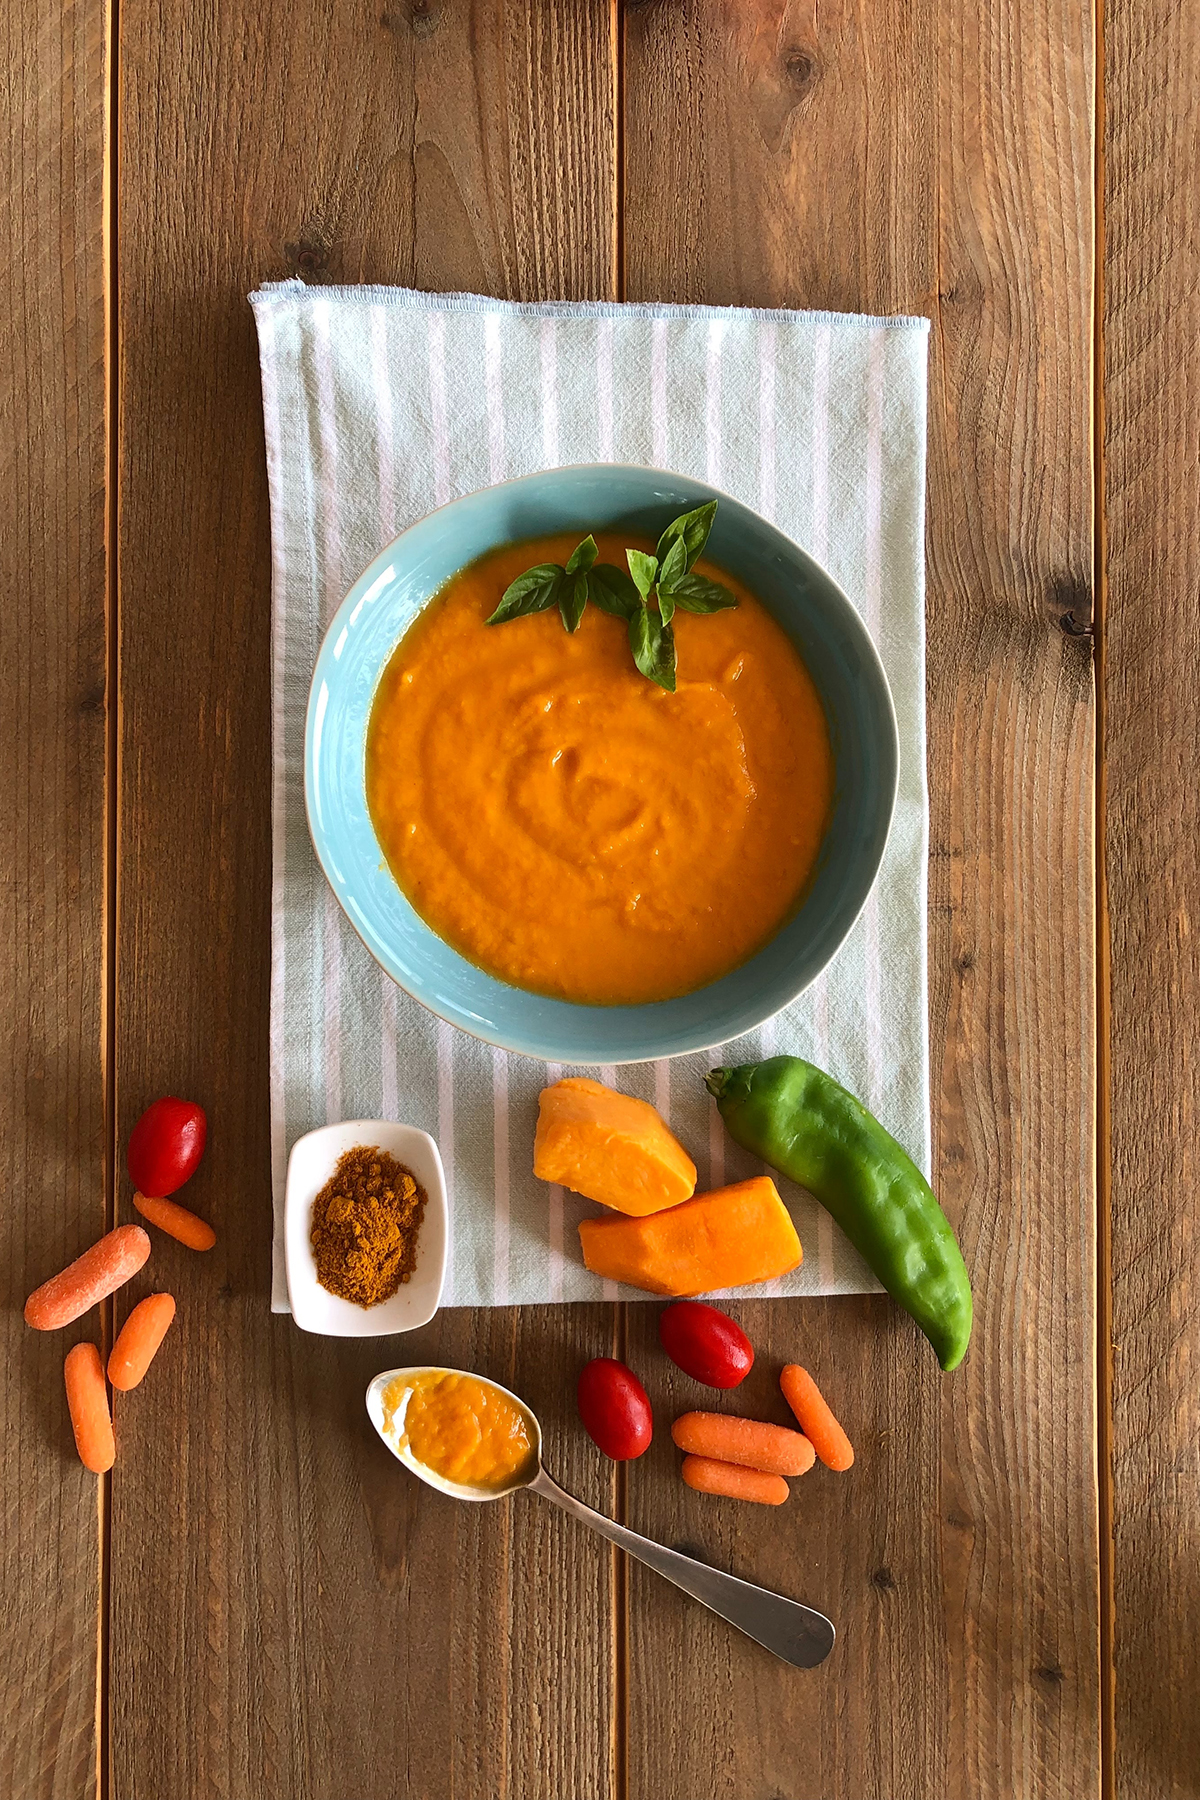 a bowl of orange carrot puree on a wooden table.